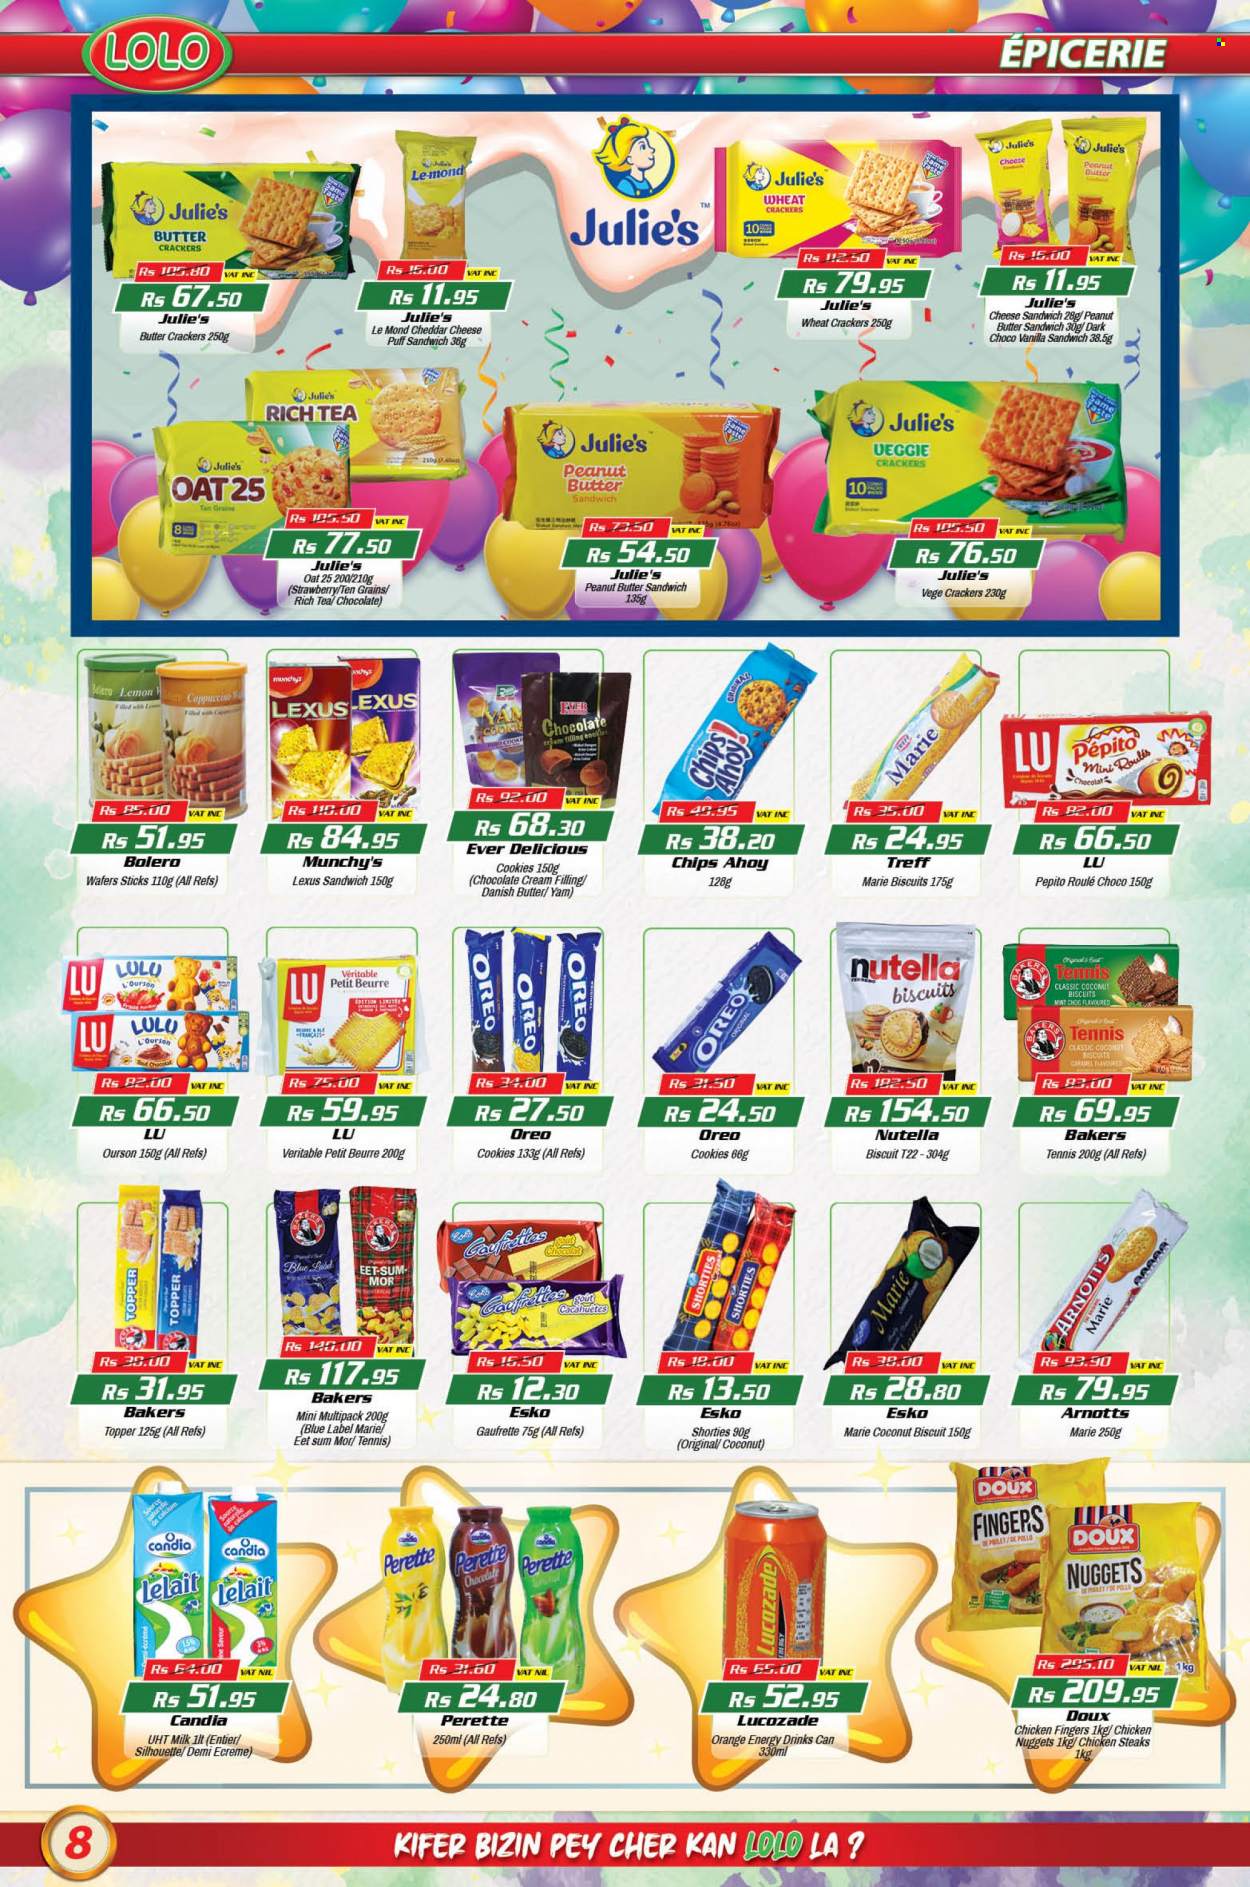 thumbnail - LOLO Hyper Catalogue - 26.07.2022 - 16.08.2022 - Sales products - oranges, nuggets, chicken nuggets, milk, cookies, wafers, crackers, biscuit, Julie's, chips, cheese puff, oats, caramel, peanut butter, energy drink, Lucozade, tea, cappuccino, Bakers, sandals, Nutella, Oreo, steak. Page 8.